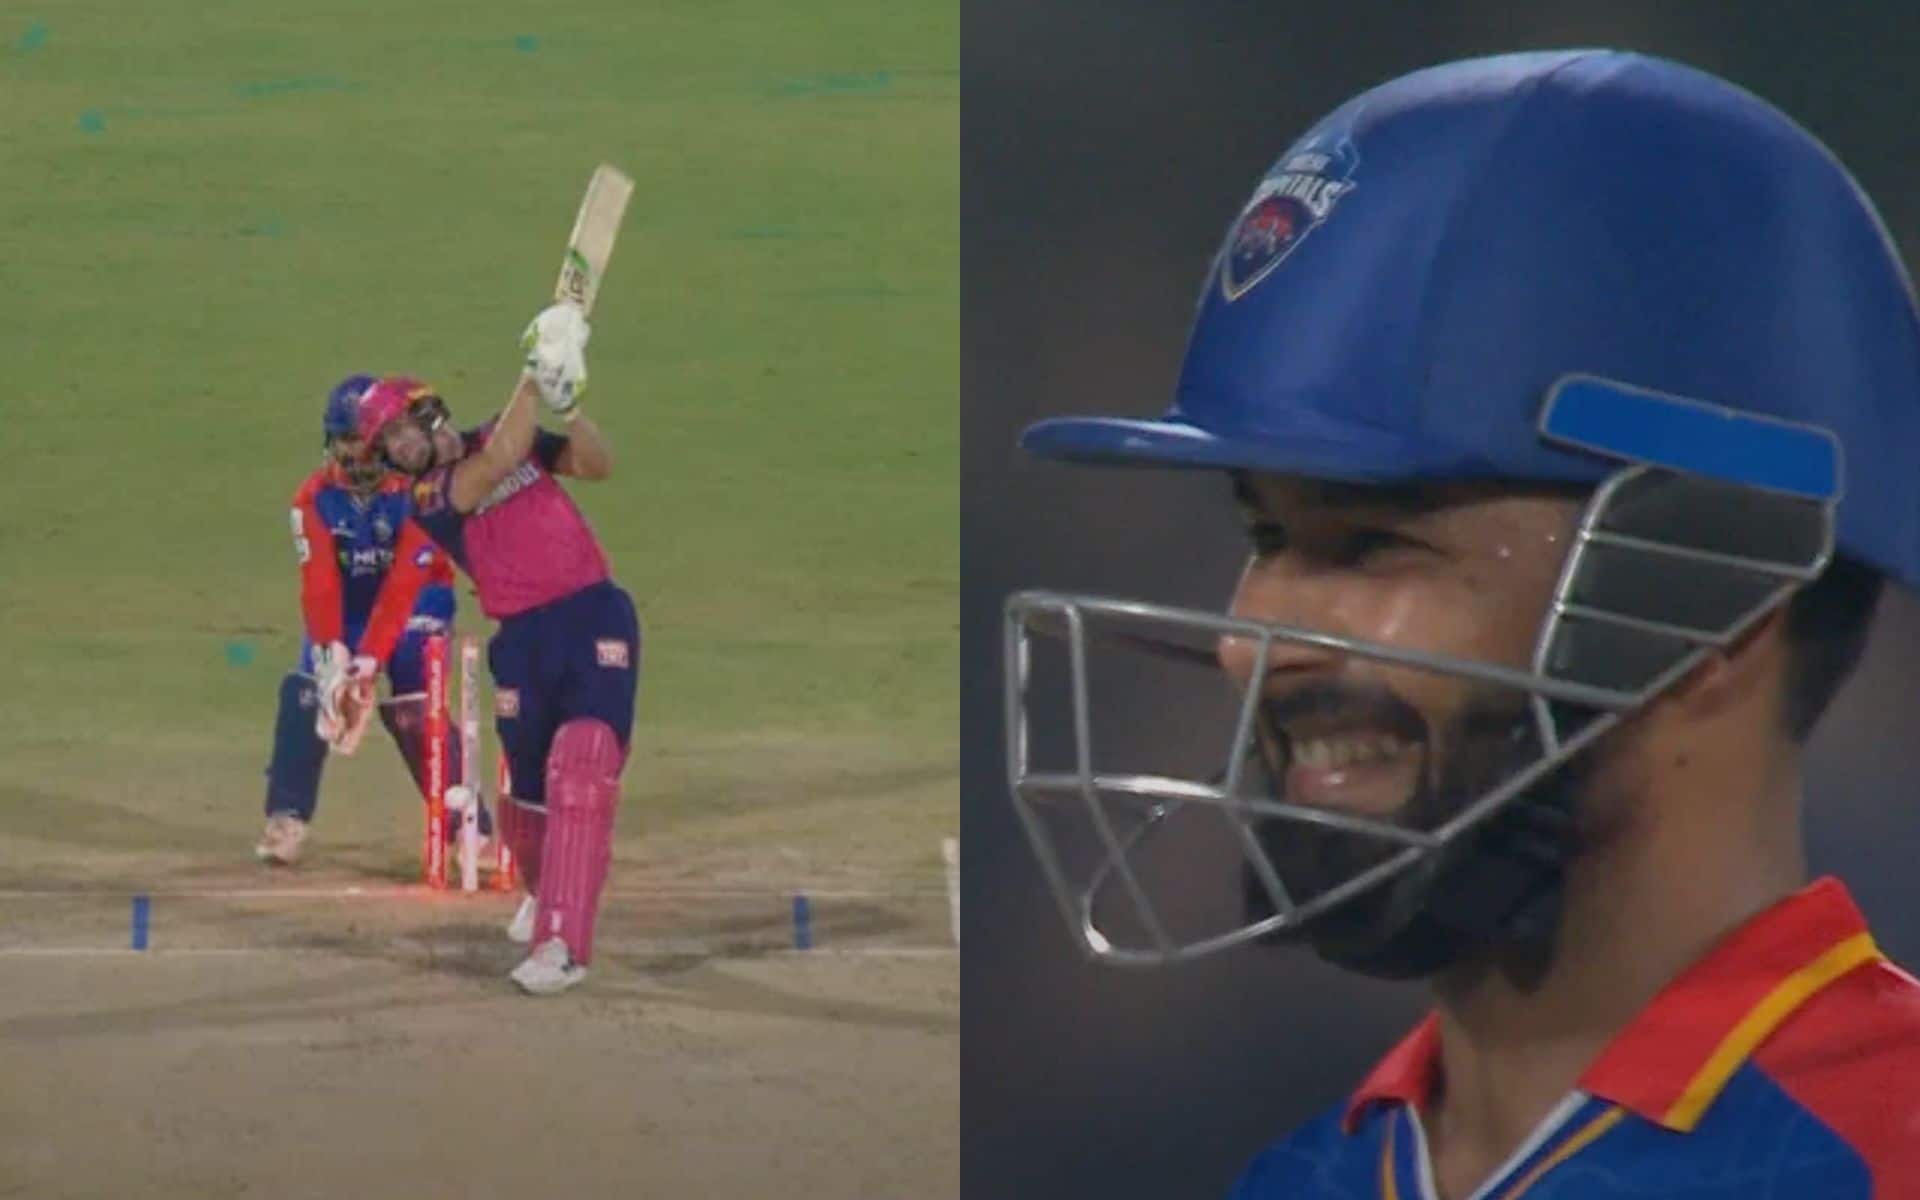 Pant's smile after Buttler's wicket (X.com)